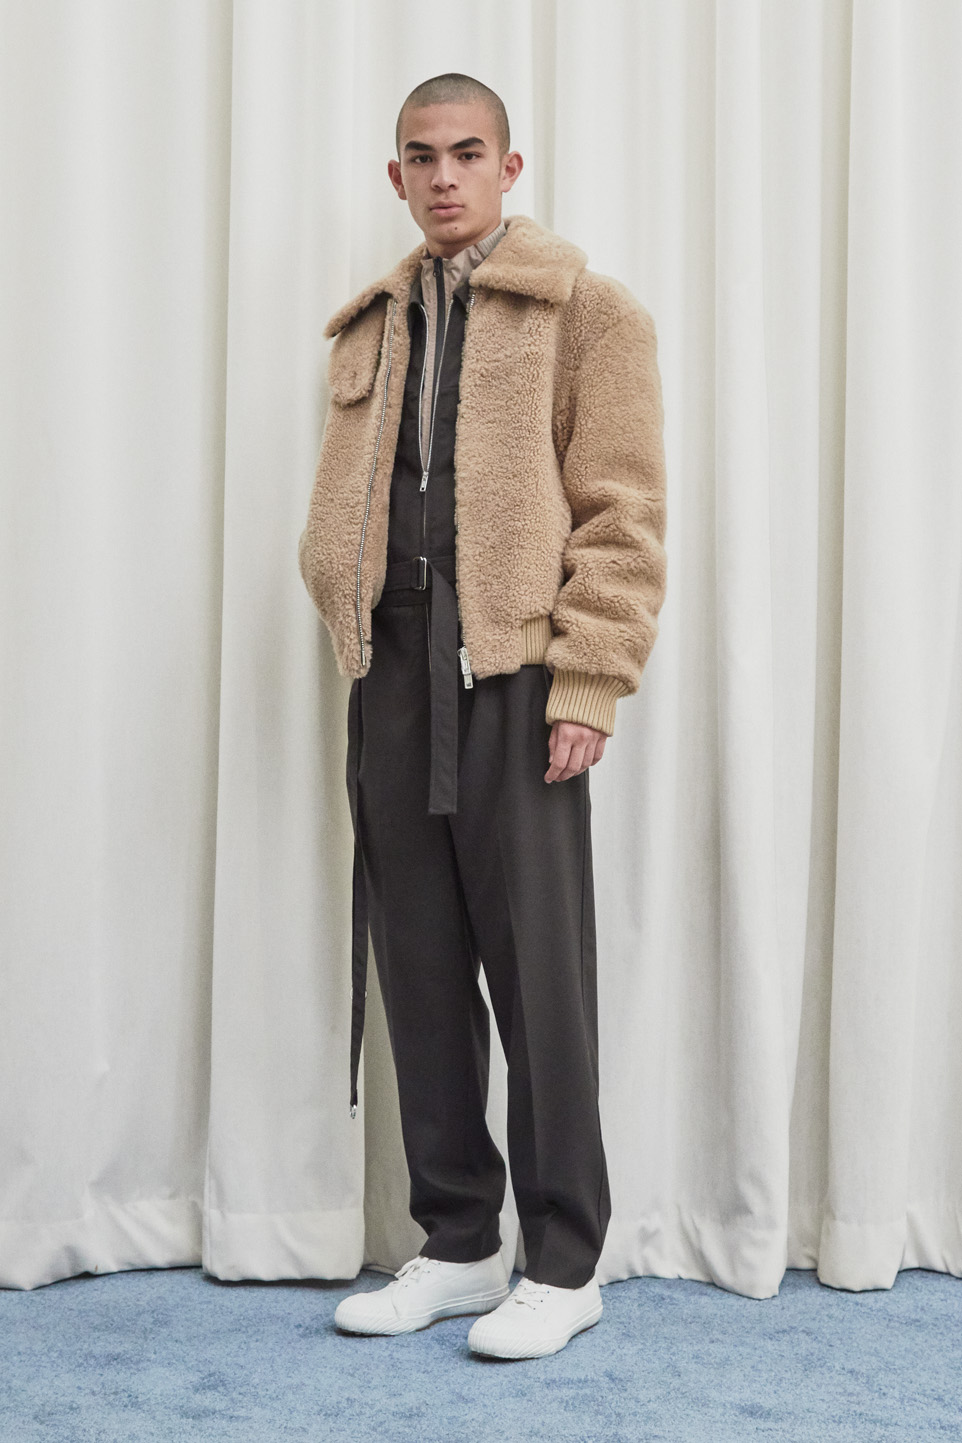 Plim FW19 Mens Collections Lores 12 3.1 phillip lim fall 2019